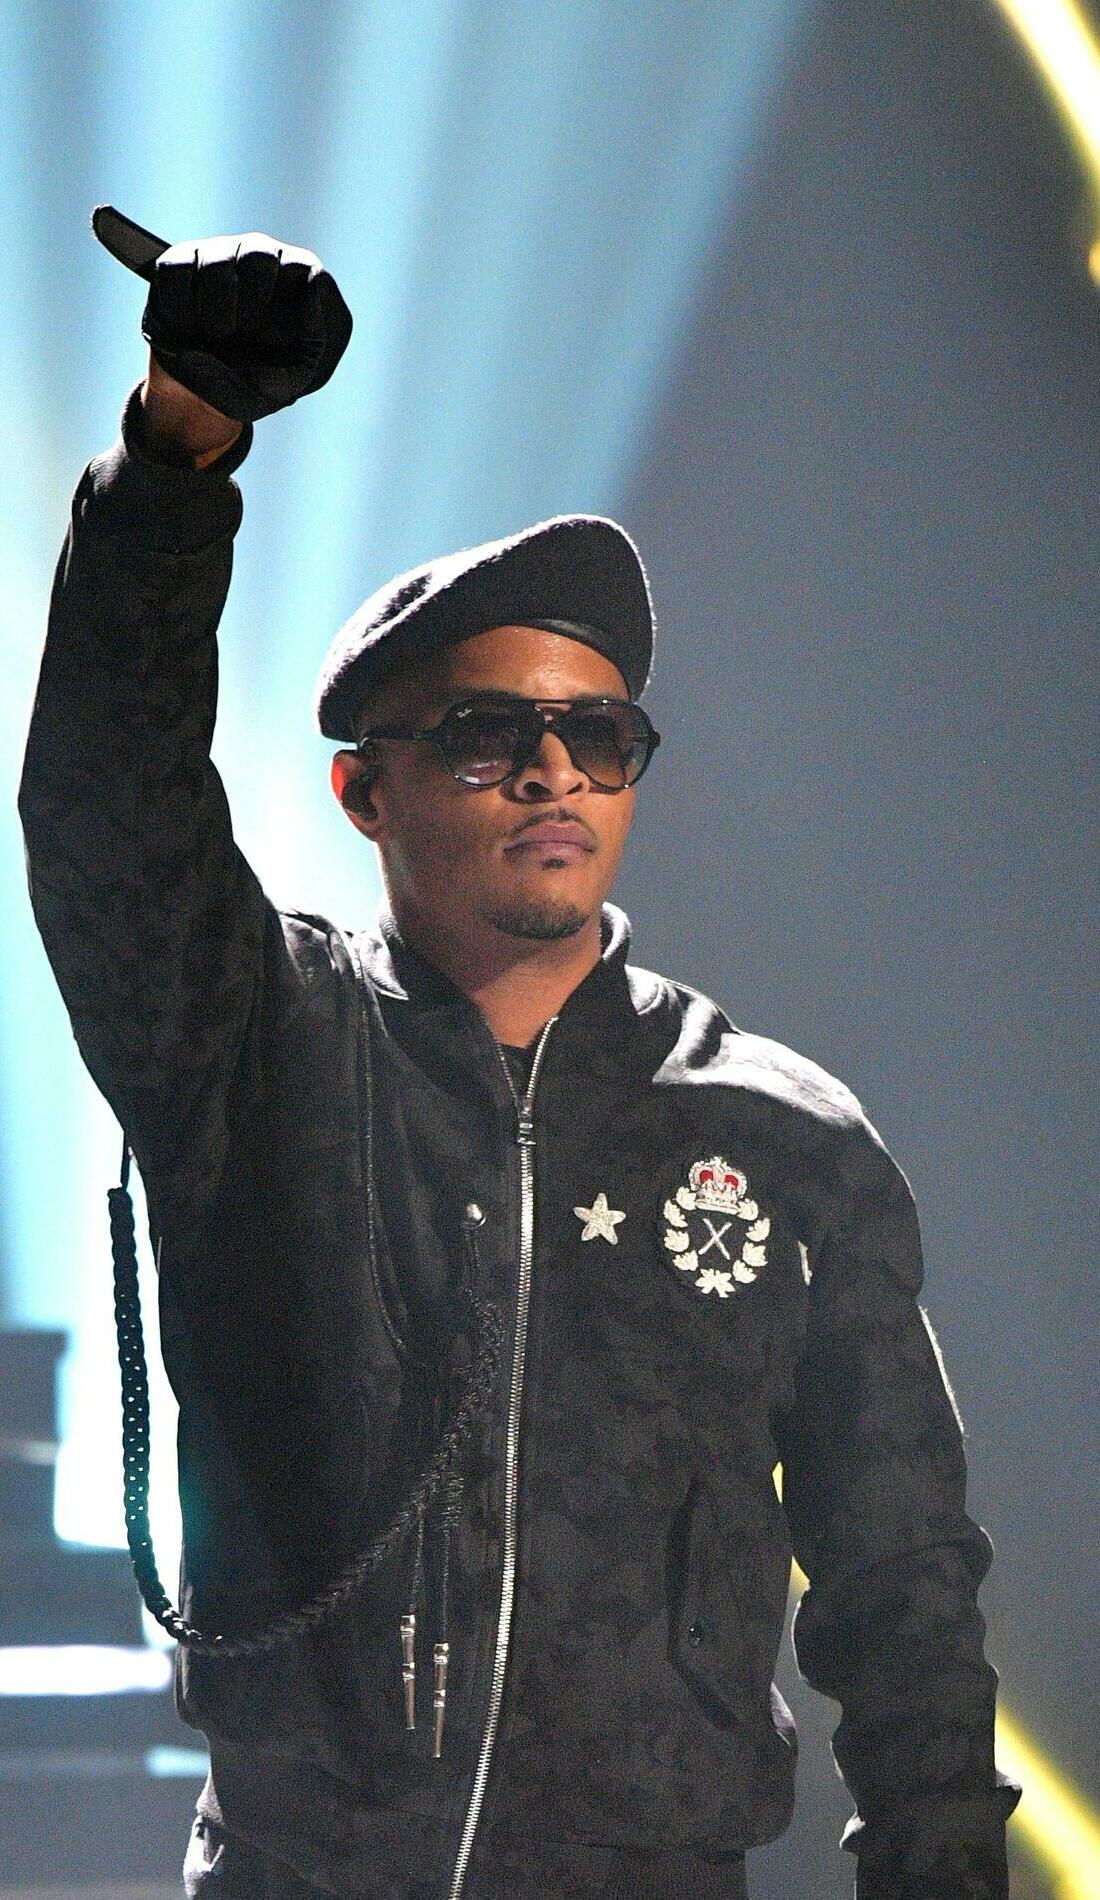 A T.I. live event